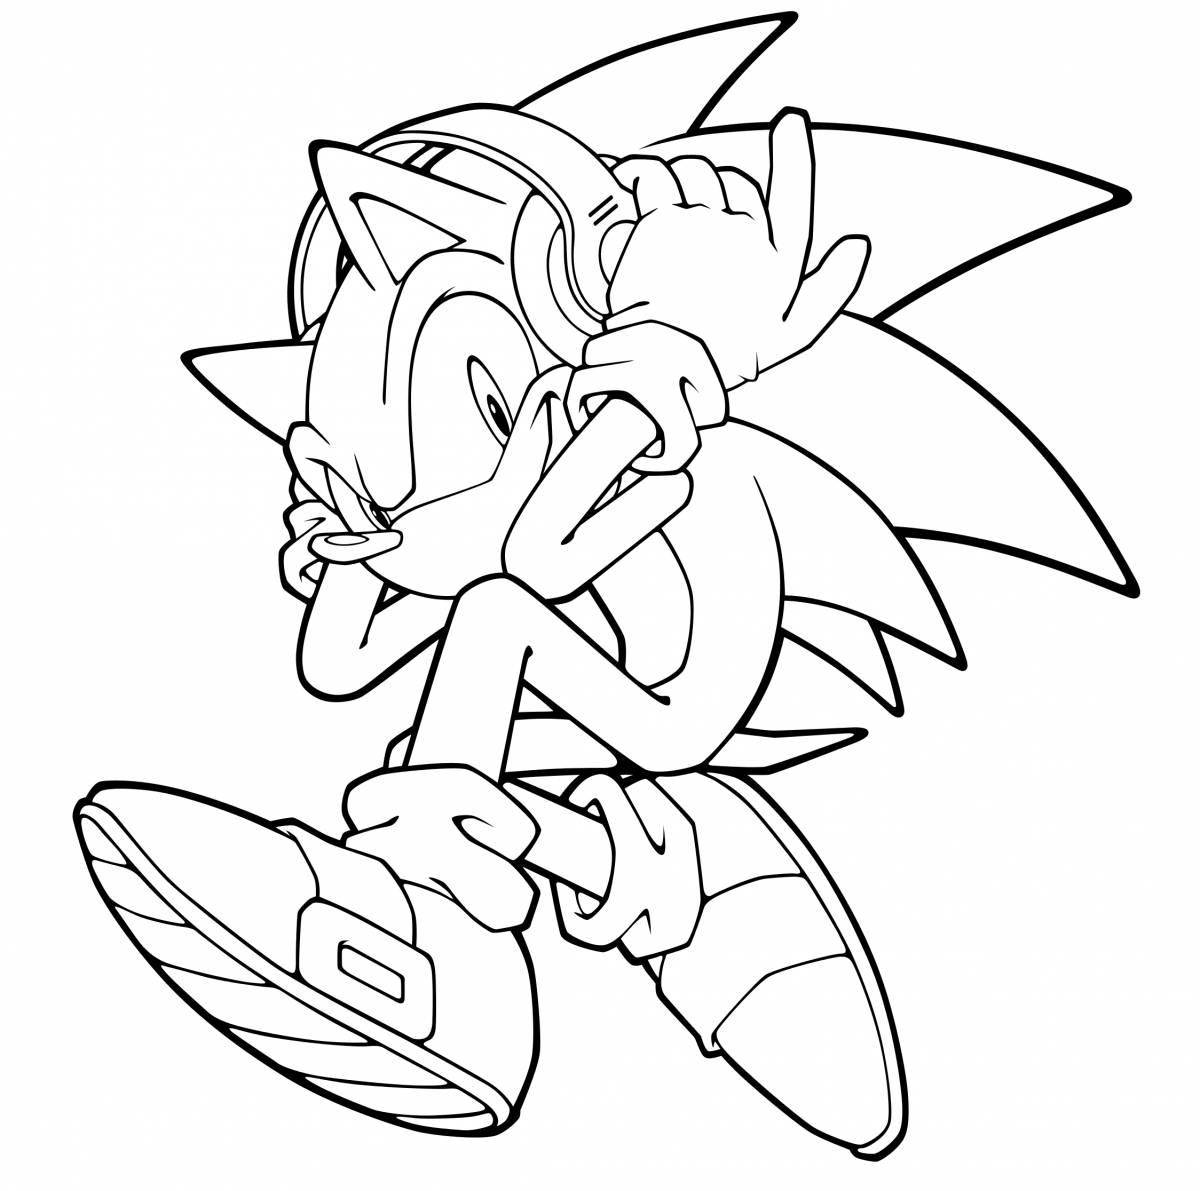 Colorful sonic rainbow coloring book